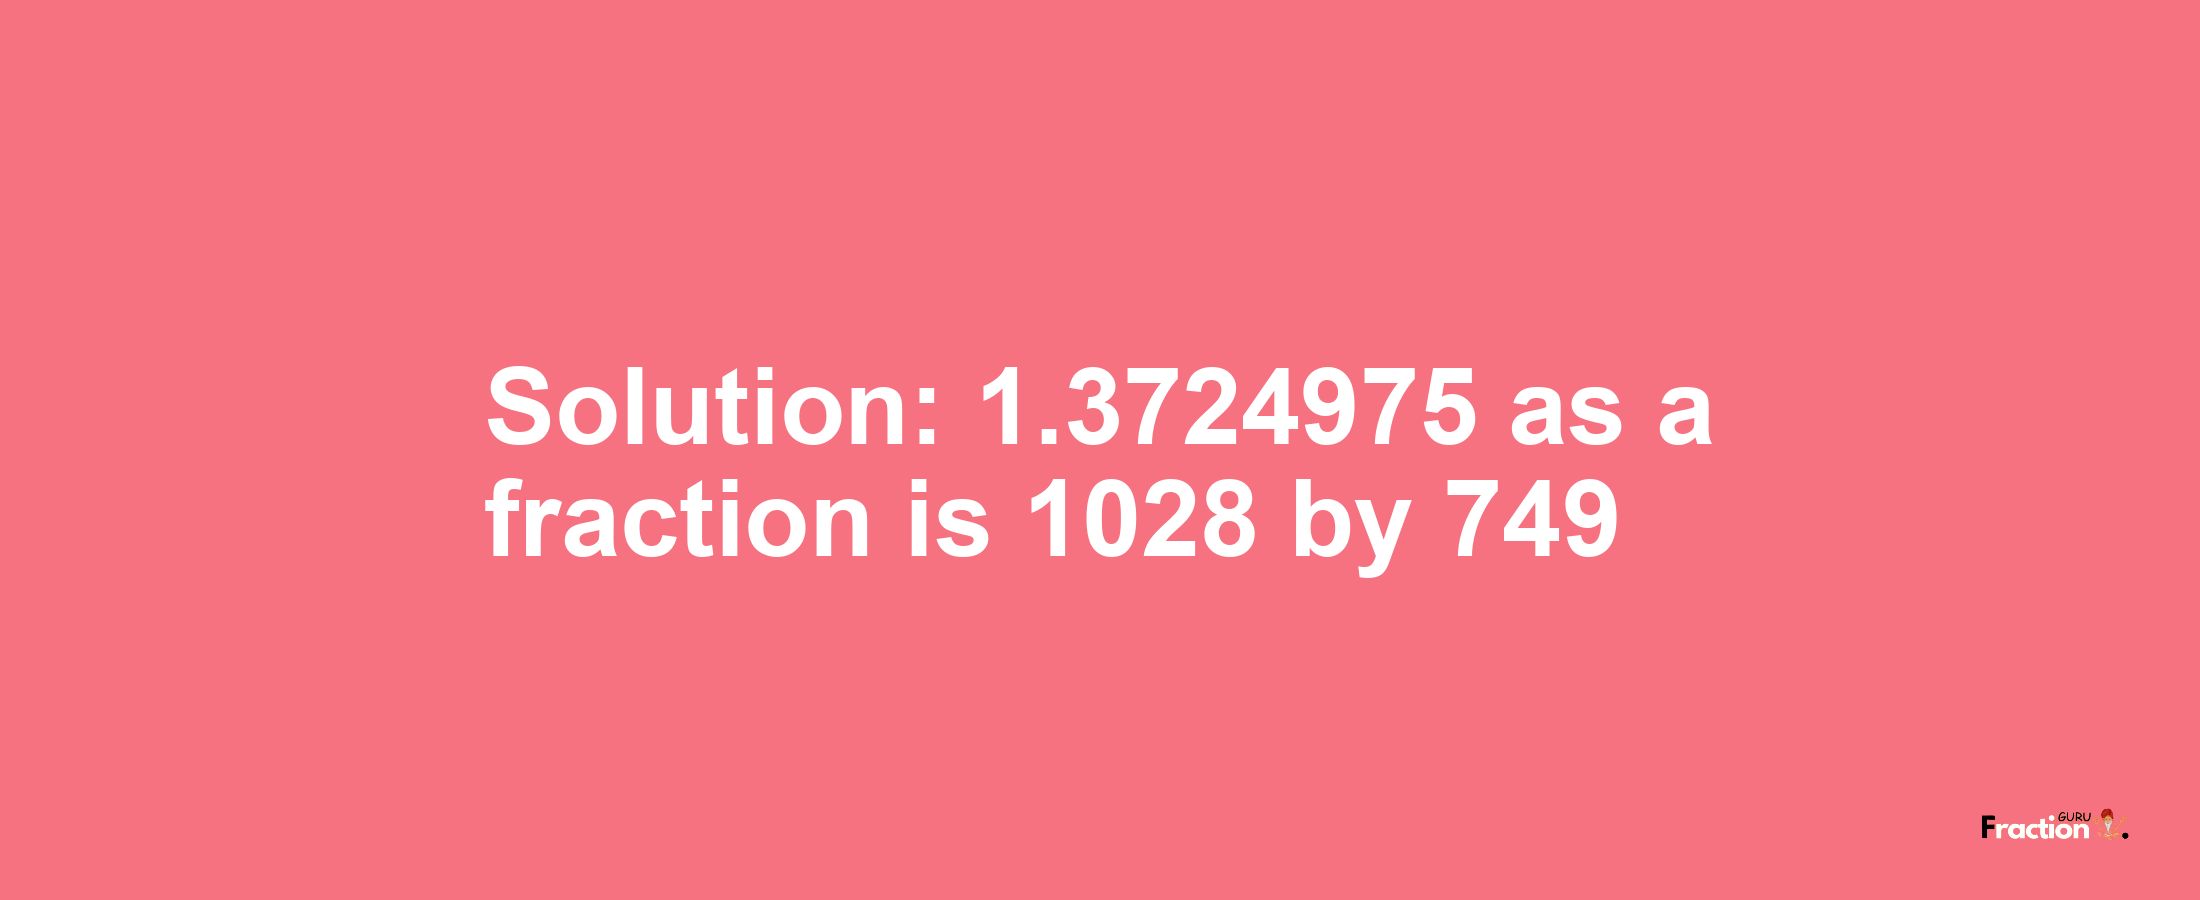 Solution:1.3724975 as a fraction is 1028/749